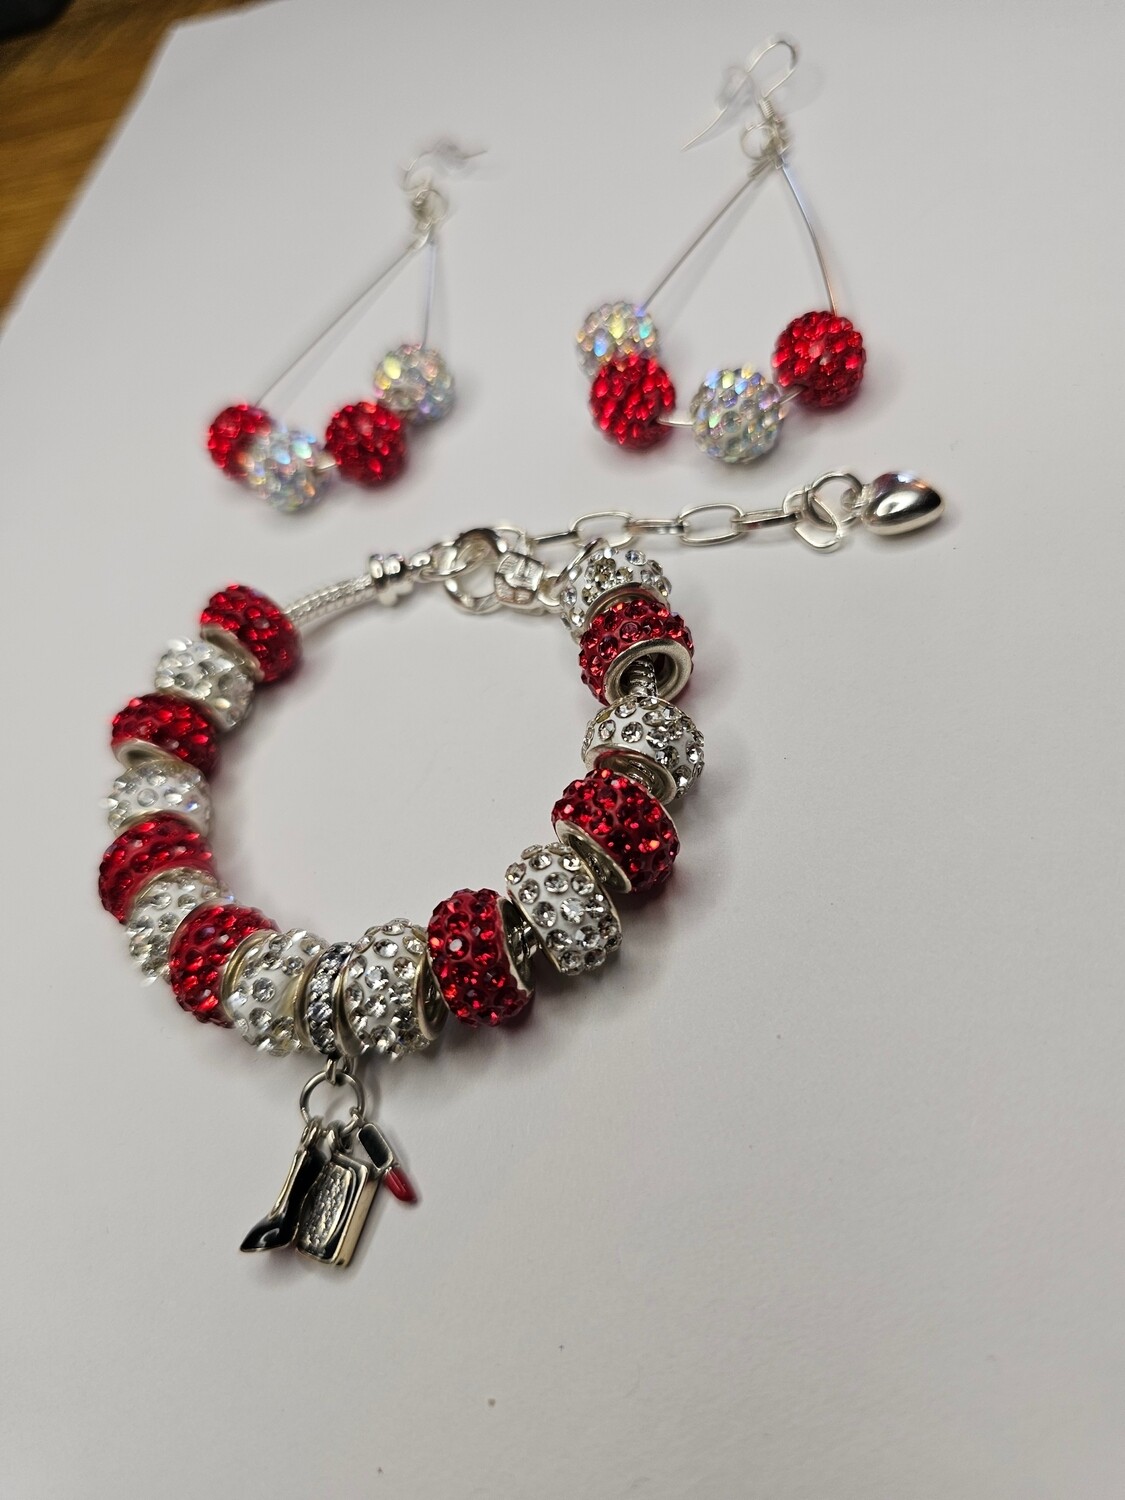 Tru Treasures custom bling Bracelet and Earring sets are perfect for any occasion and will add some sparkle to any look! 